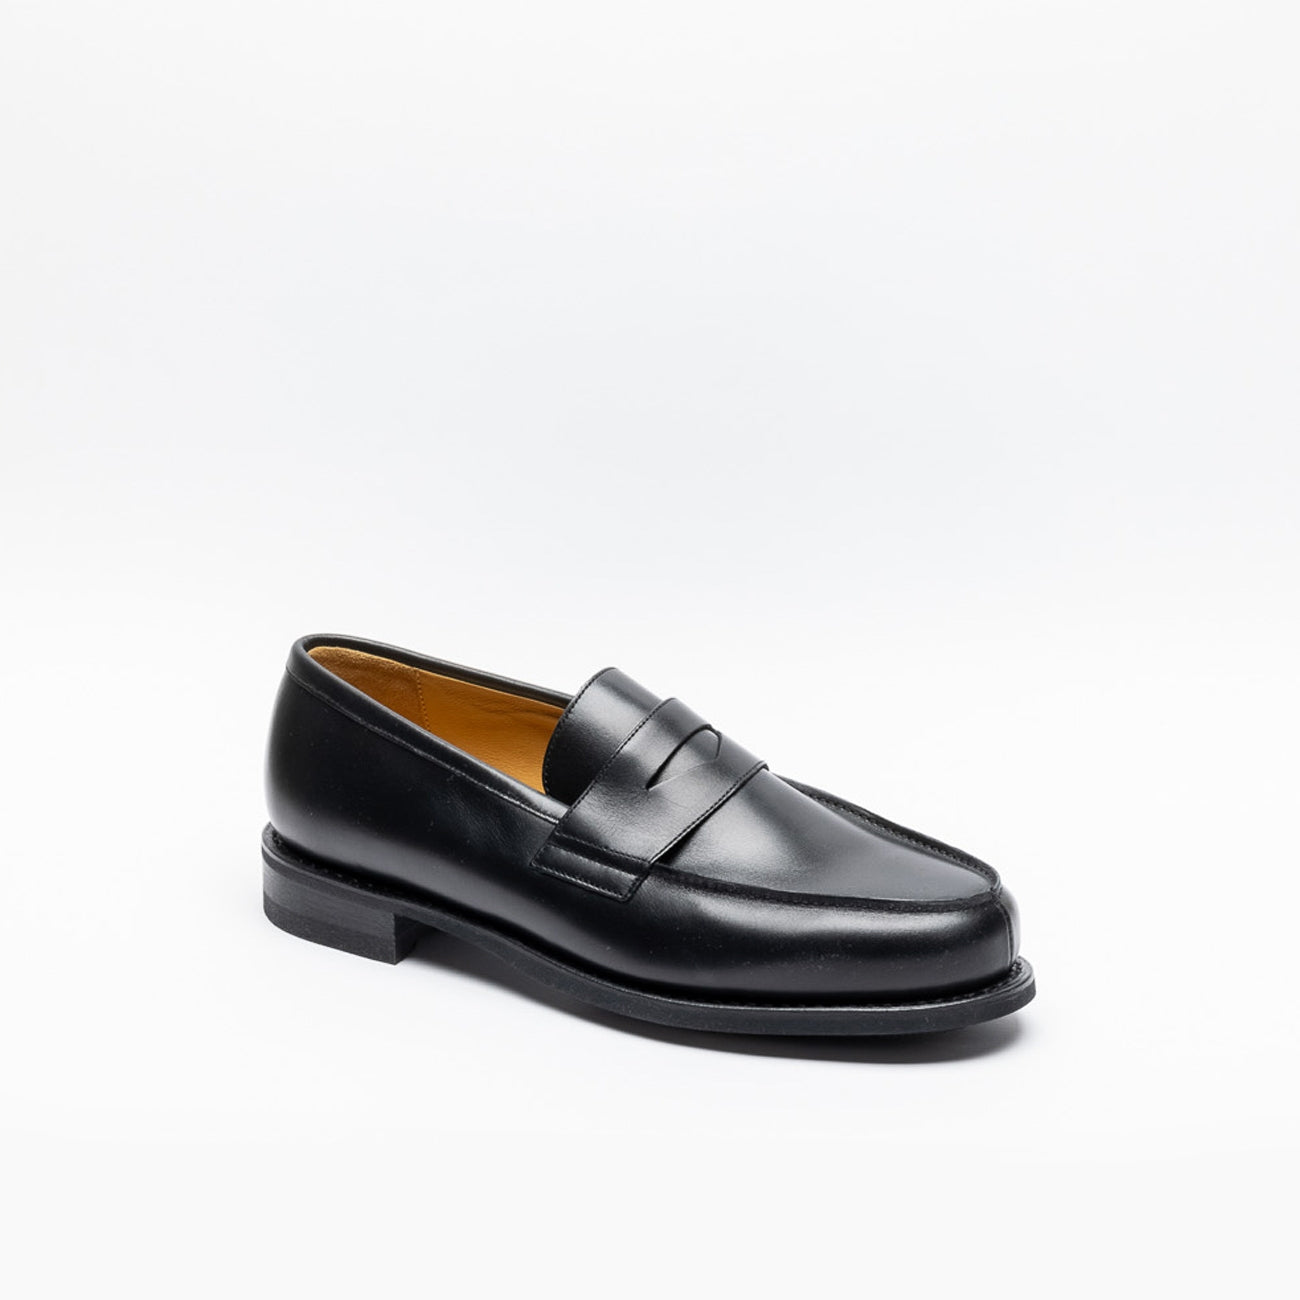 Paraboot Adonis penny loafer moccasin in black leather